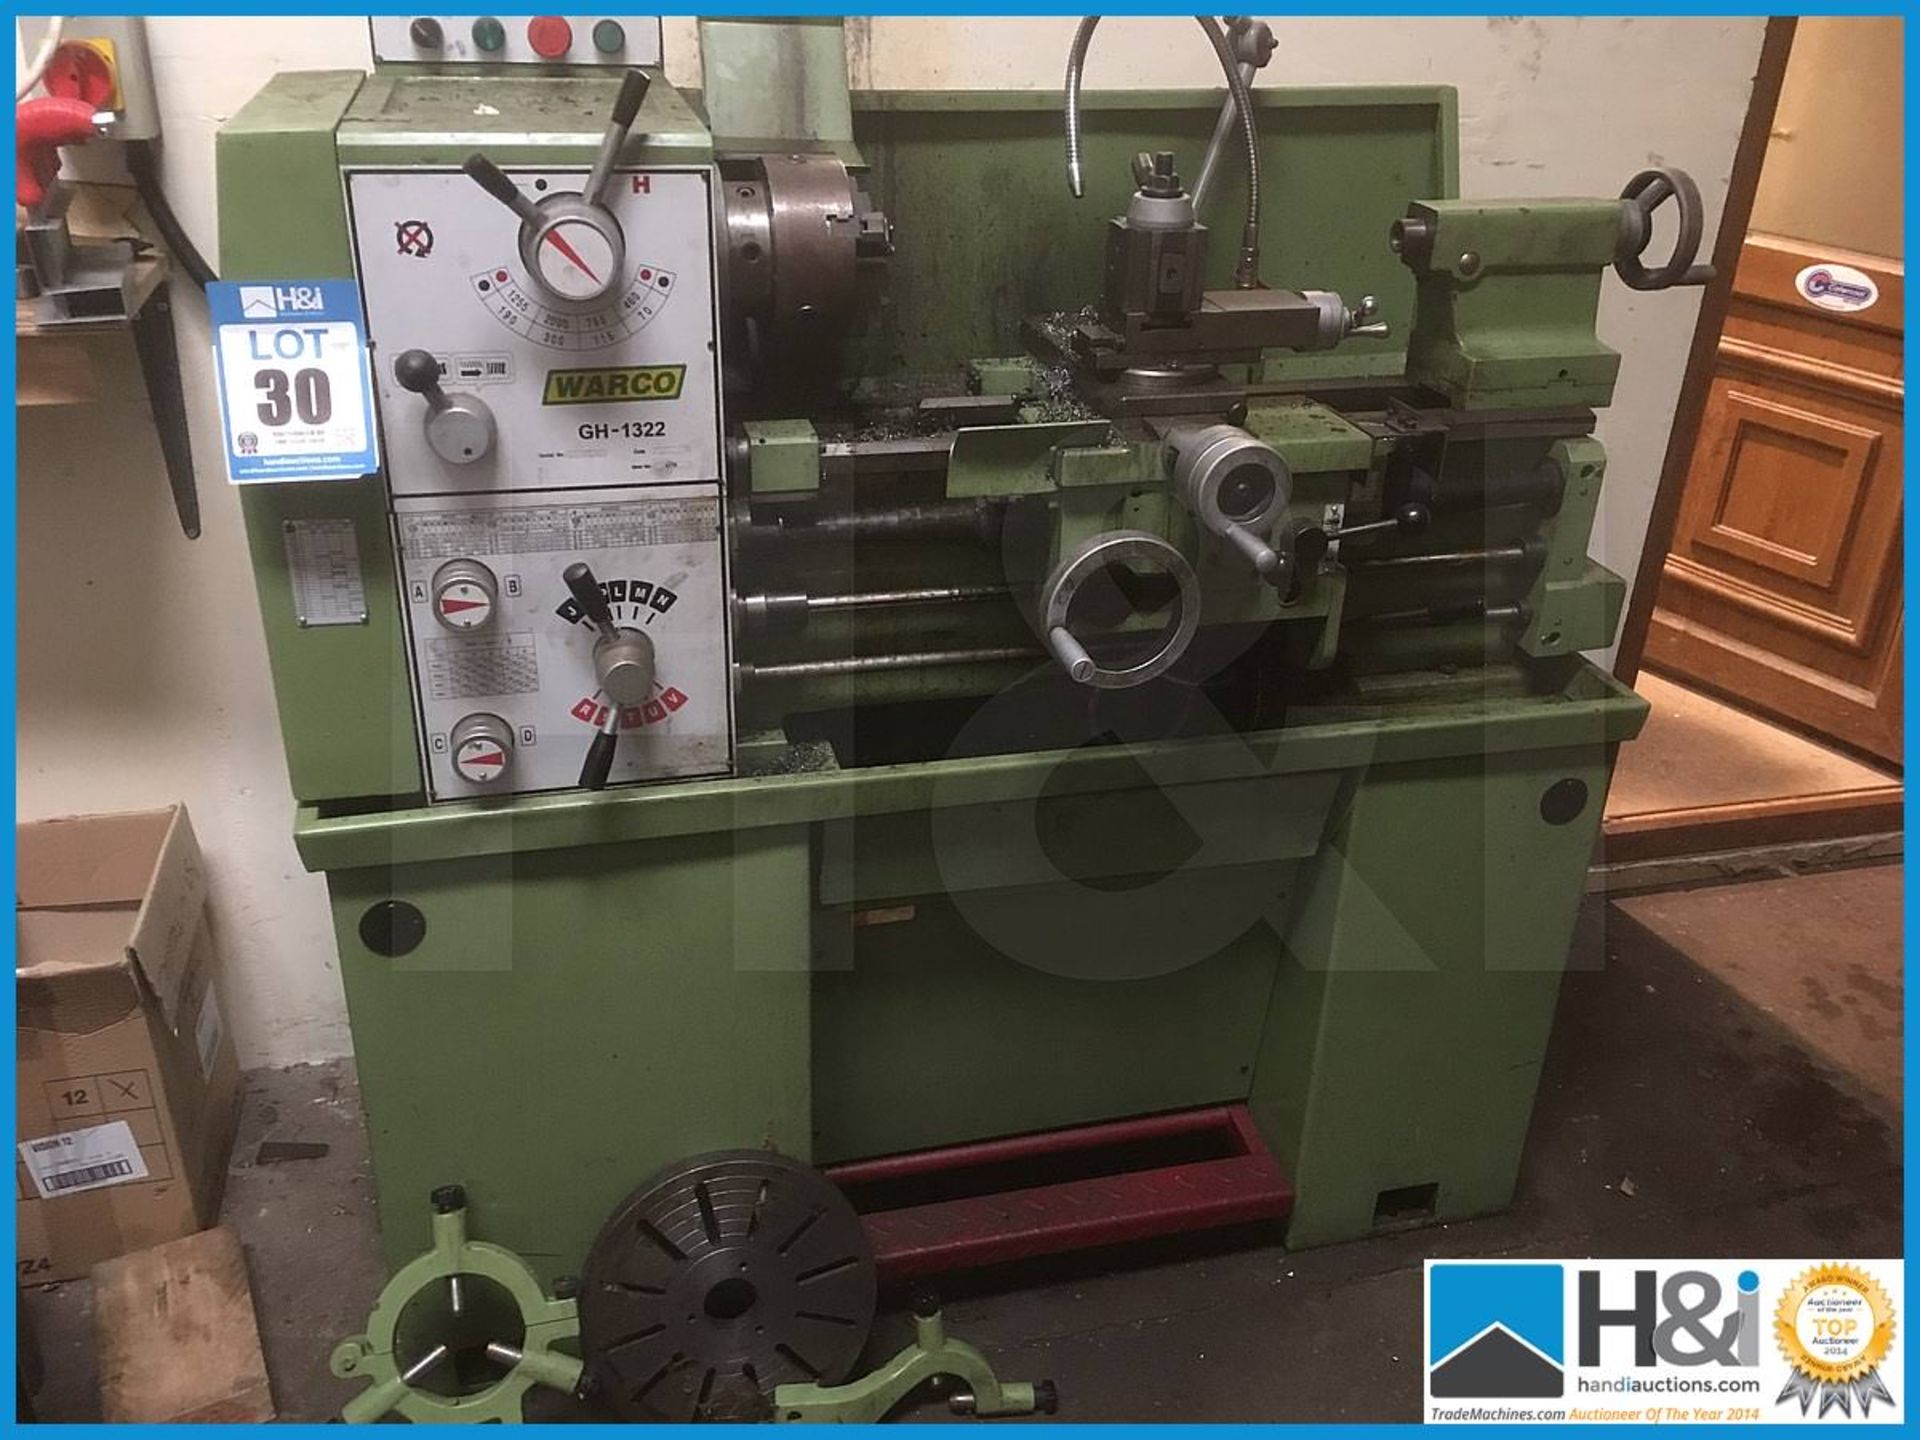 Wargo GH 1322 3 phase tool room lathe with work steady and face plate, reversable 6" chuck. 600mm